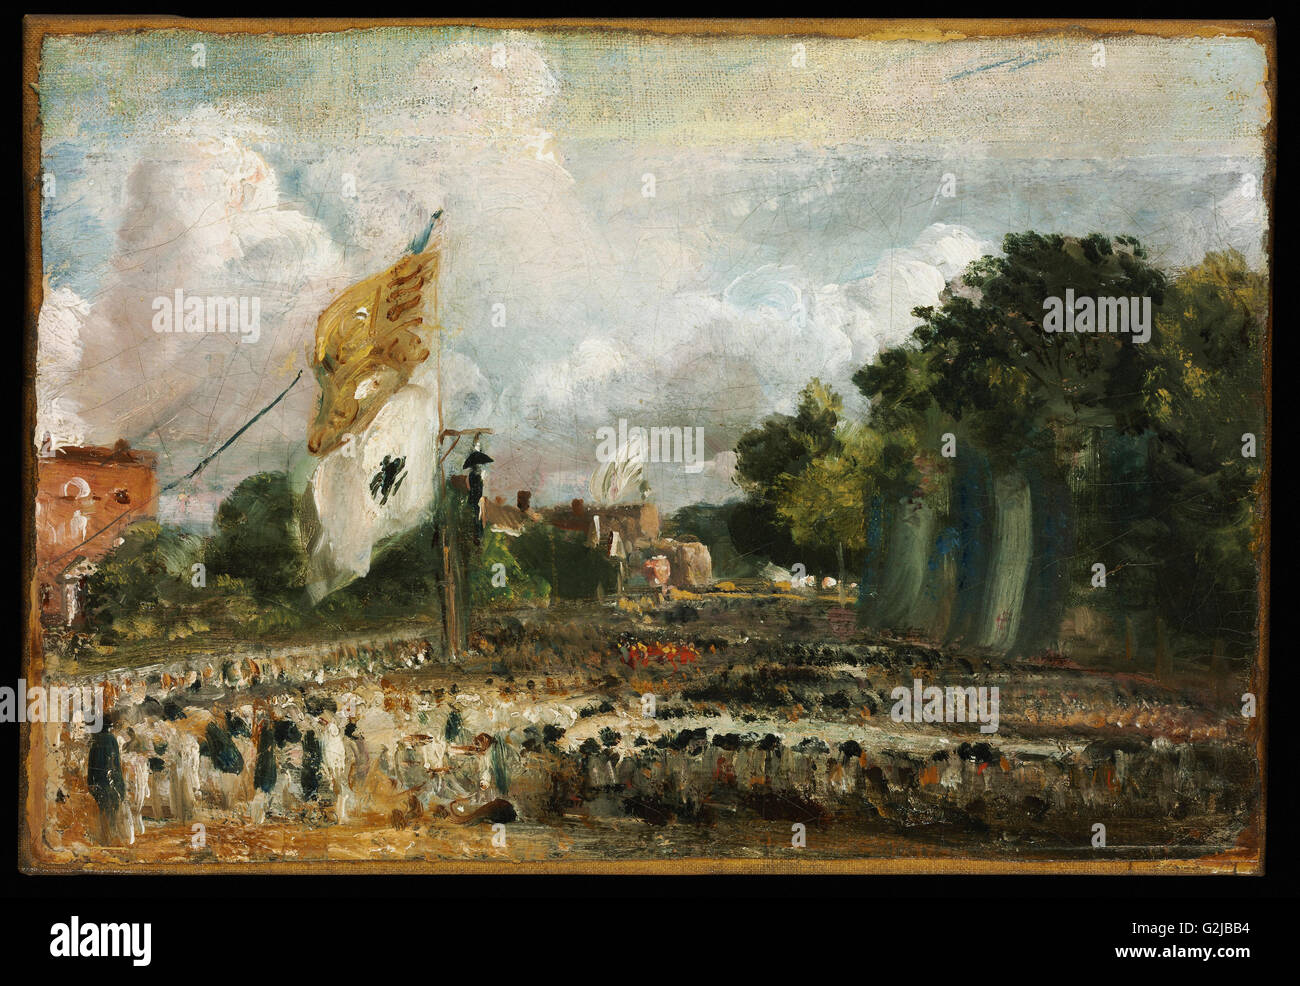 John Constable - The Celebration in East Bergholt of the Peace of 1814 Concluded in Paris - Museum of Fine Arts, Budapest Stock Photo